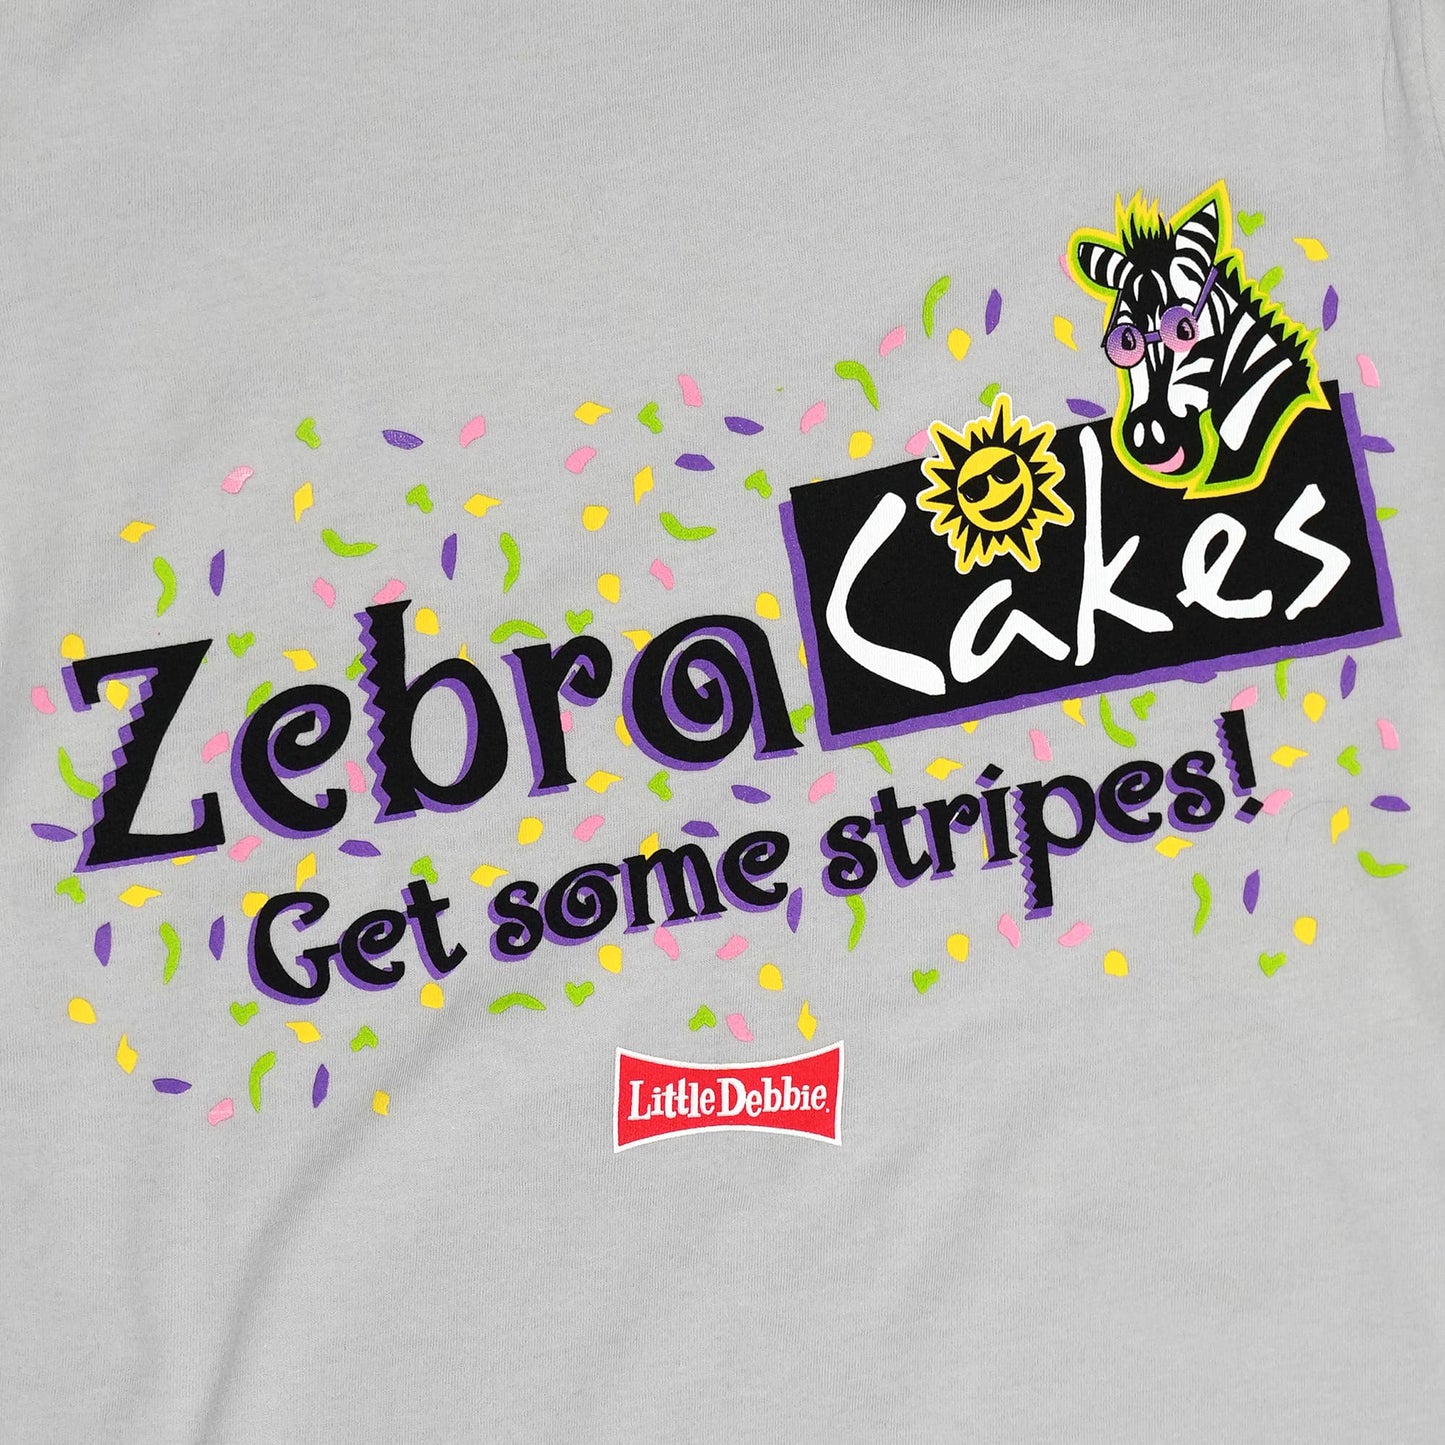 Close-up of the graphic on a light gray t-shirt, displaying the 'Zebra Cakes' logo in bold black and purple letters, with the phrase 'Get some stripes!' underneath. Adjacent to the text is a colorful illustration of a cartoon zebra and a sun in yellow and black. The background of the graphic is scattered with small paint splatters in purple, green, and yellow. A small red Little Debbie logo is visible in the lower right of the design.